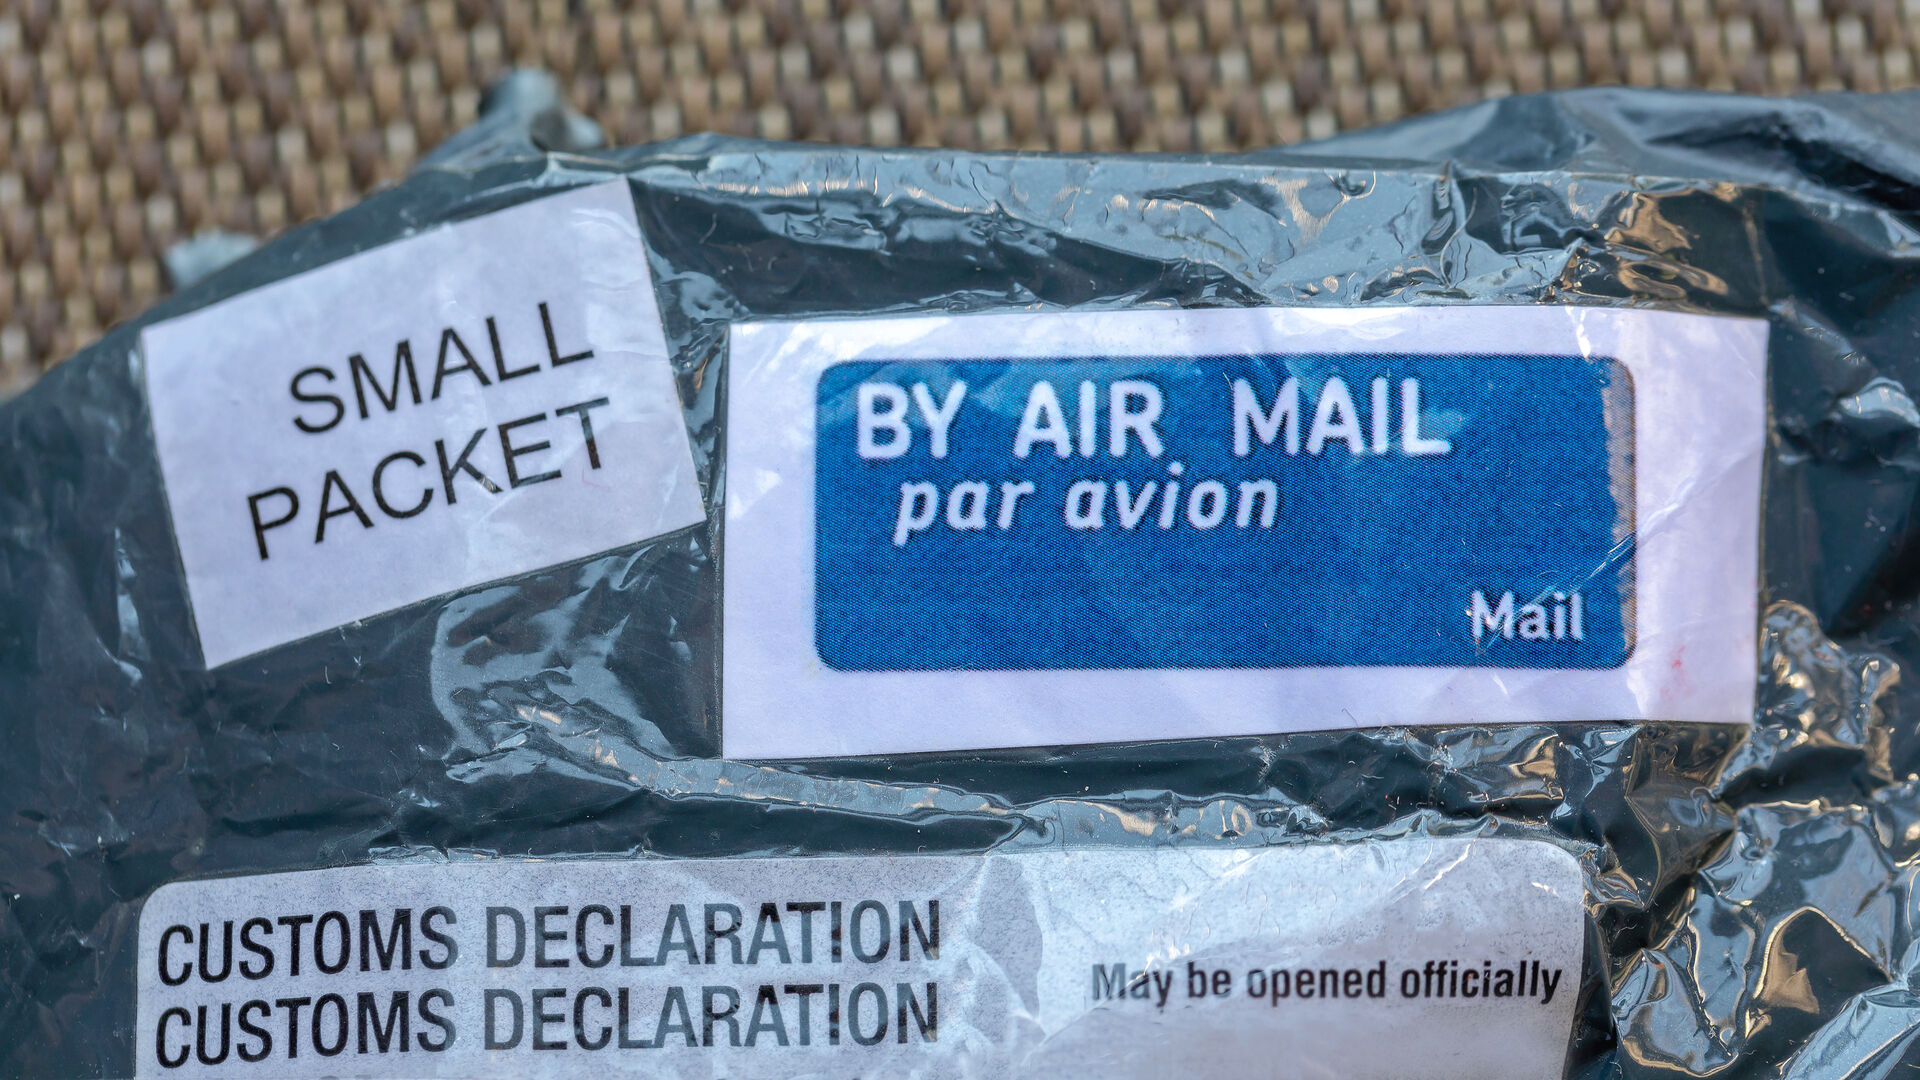 A parcel for shipping by airmail.